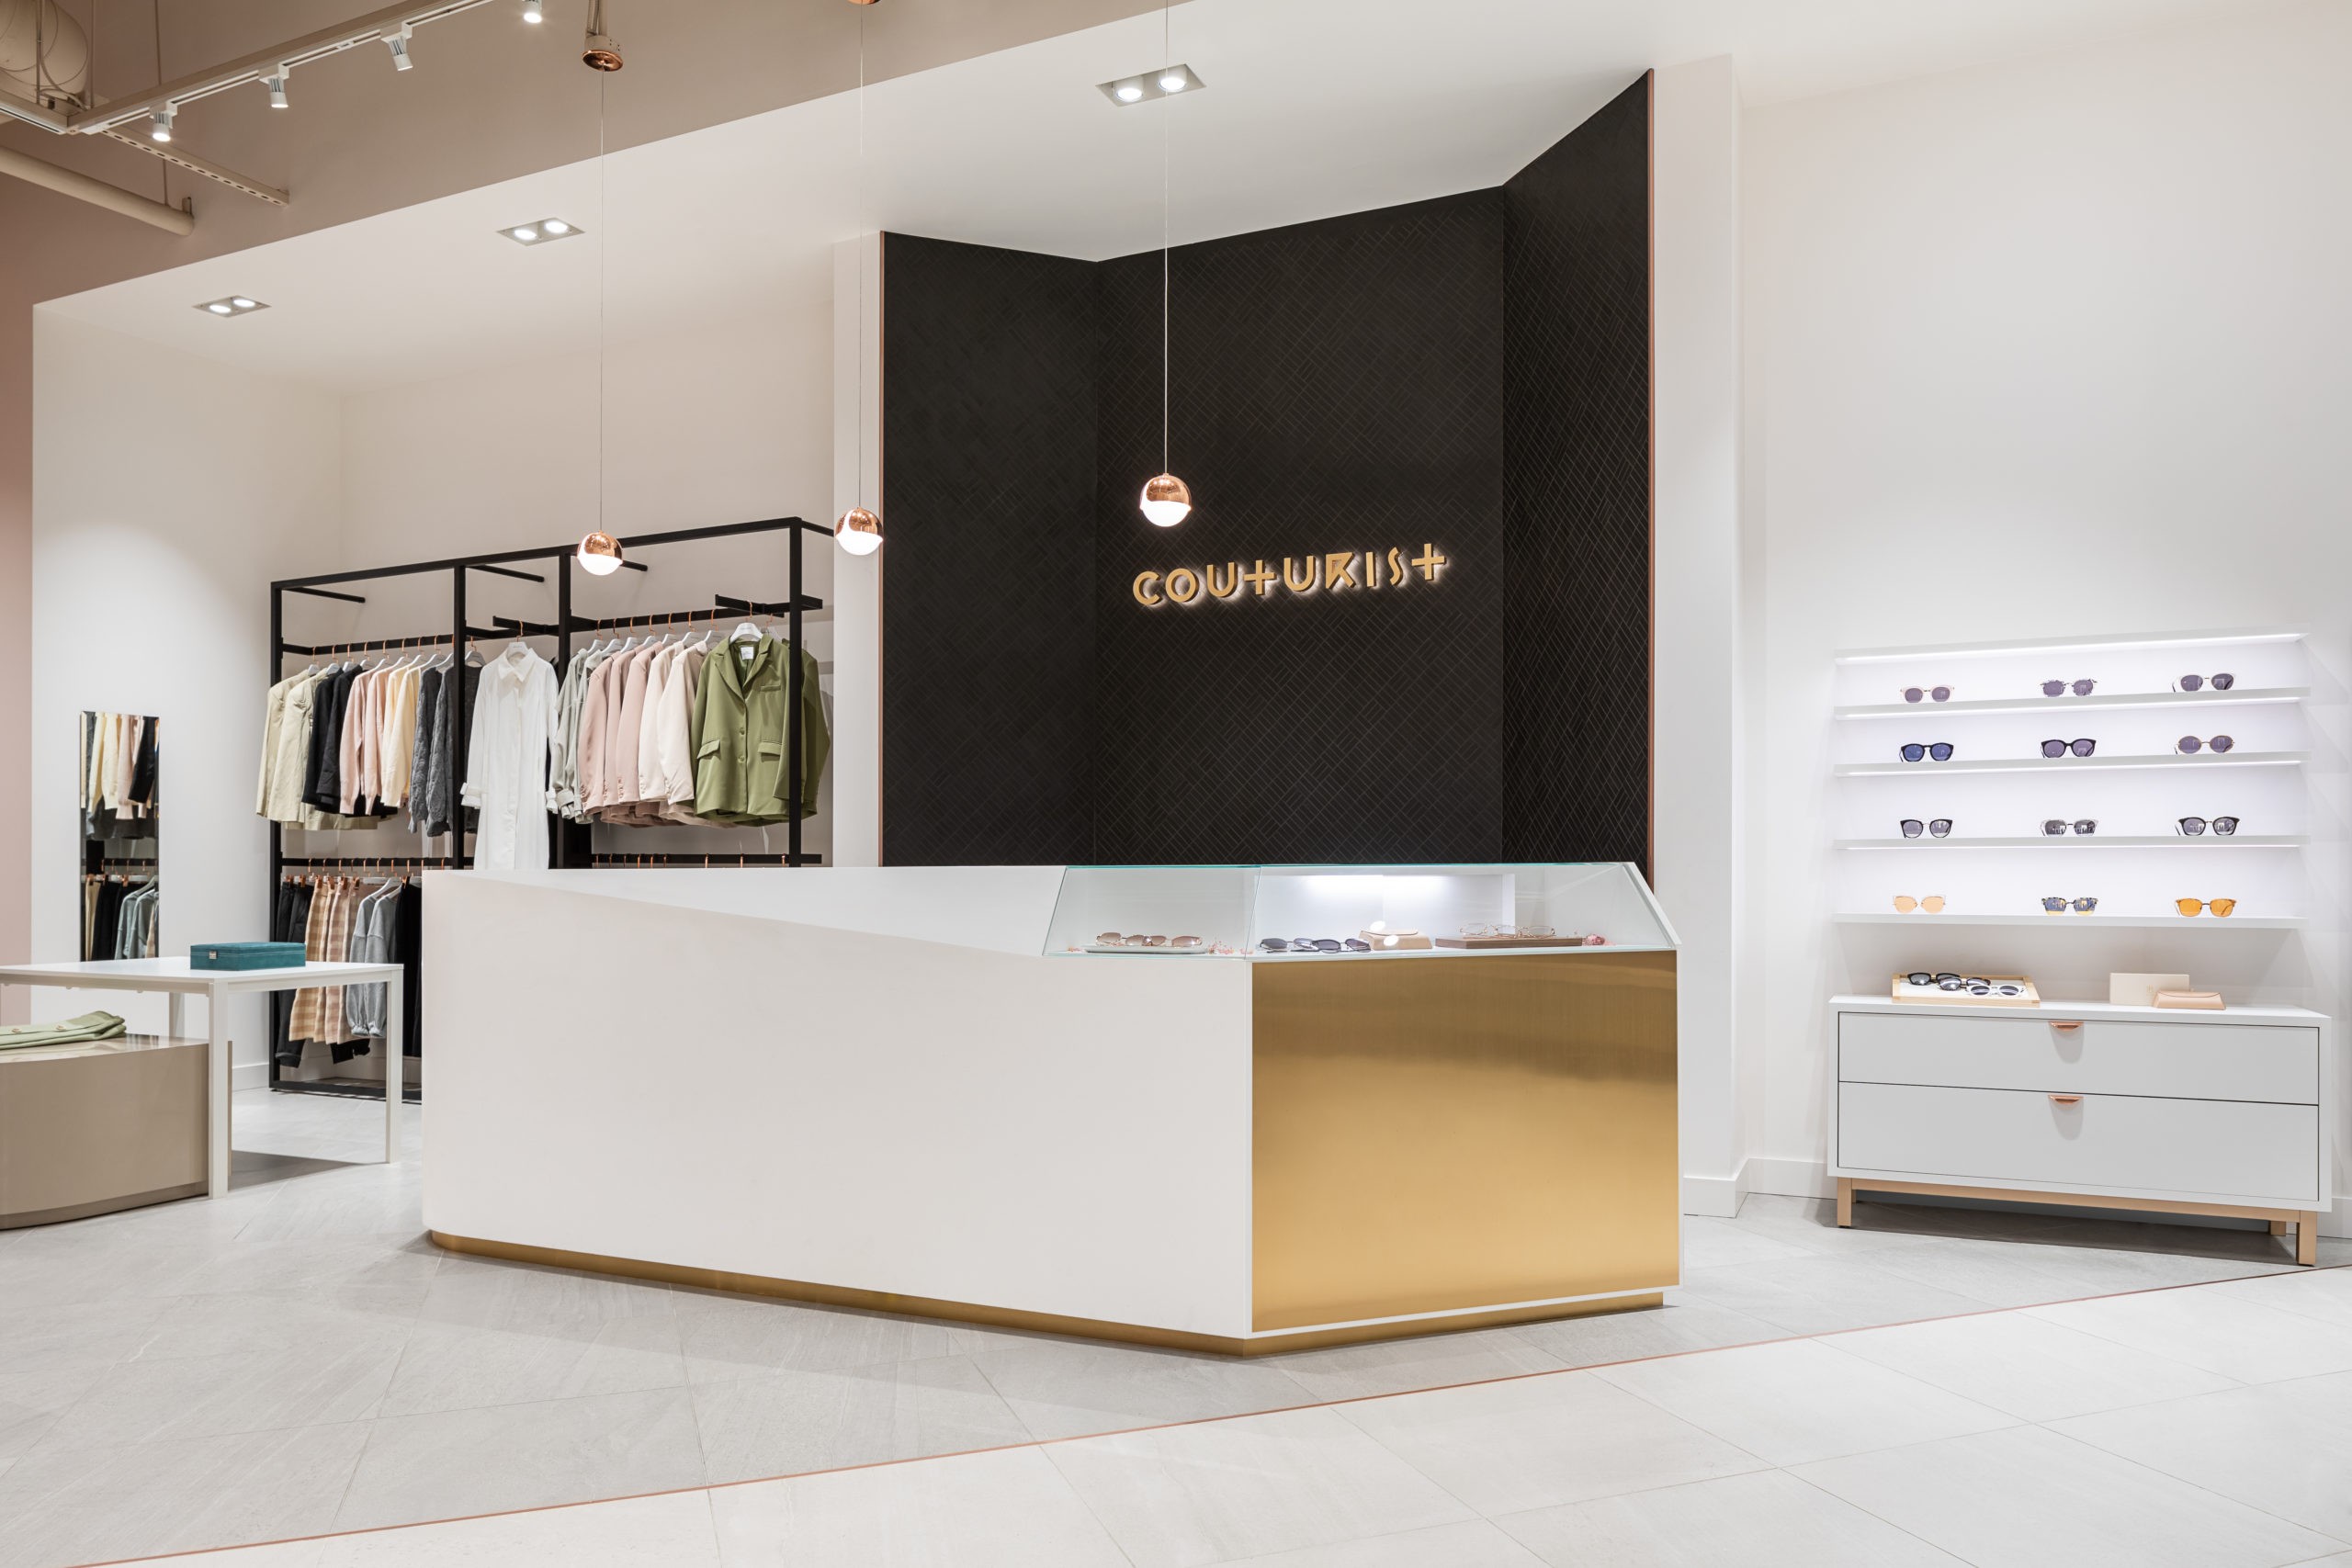 Cash desk and feature wall , Retail & Showroom Interior Design, Couturist in Burnaby  BC, by Cutler